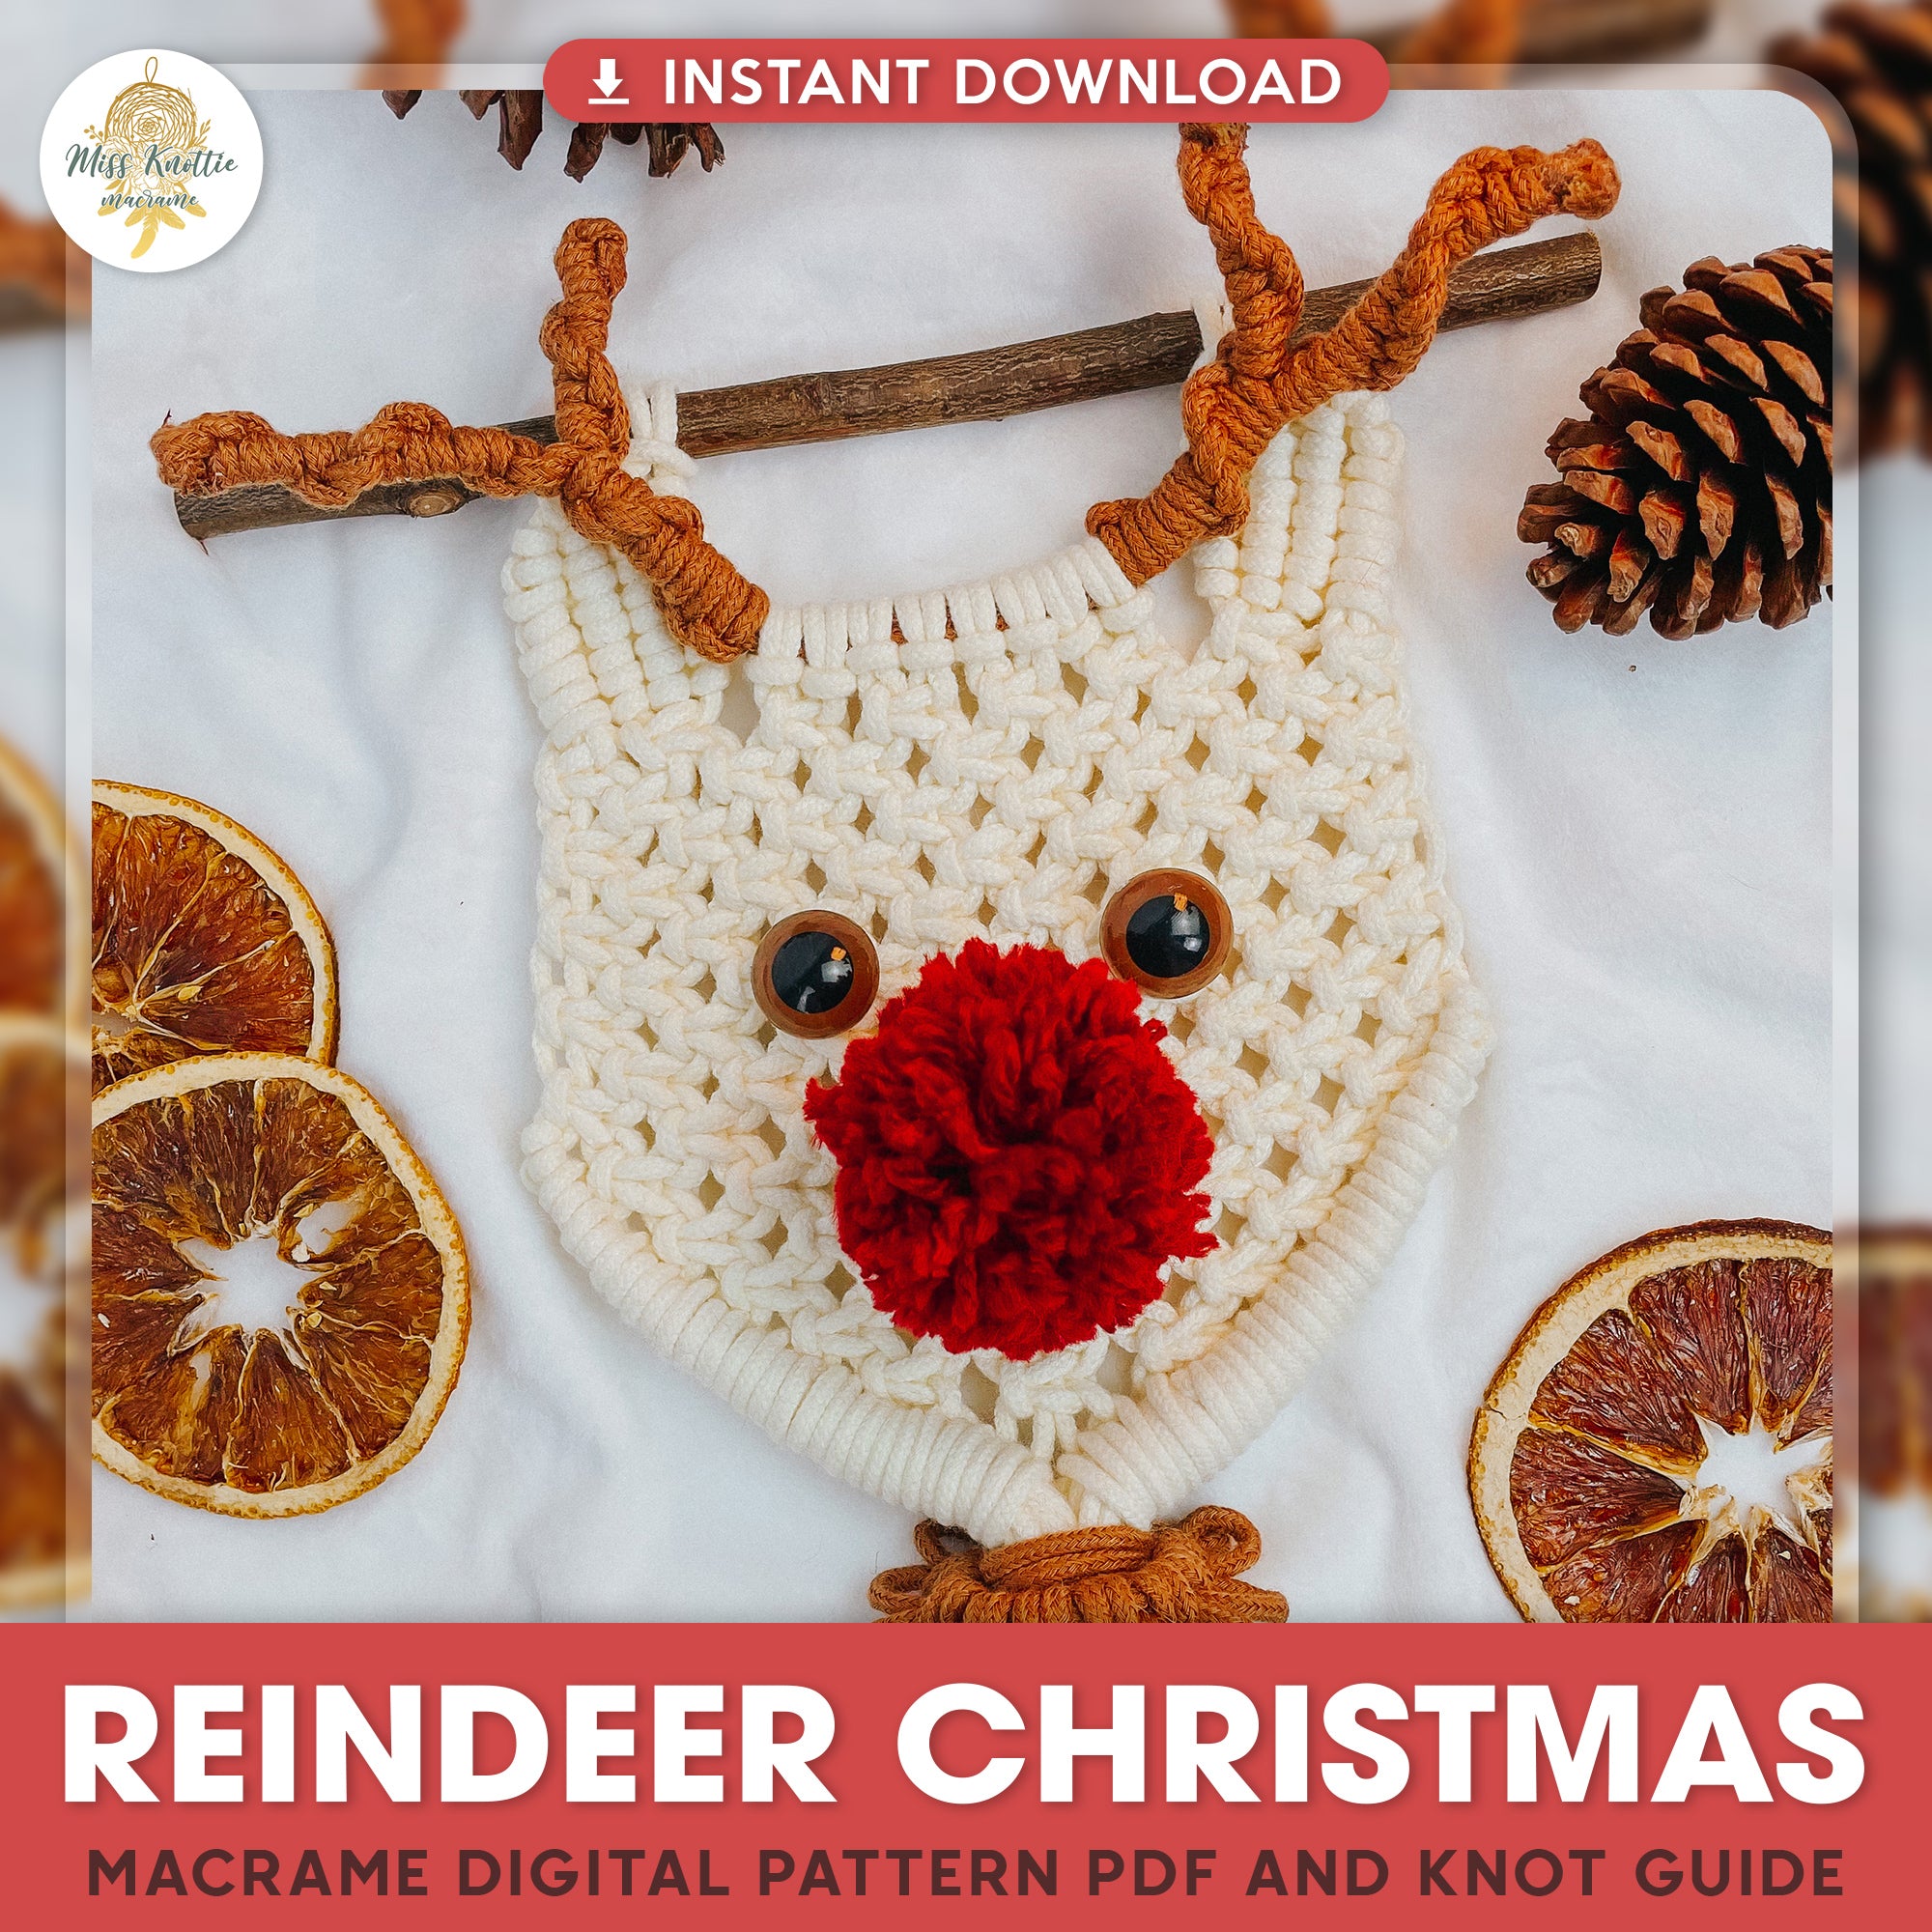 Reindeer Christmas Pattern - Digital PDF and Knot Guide